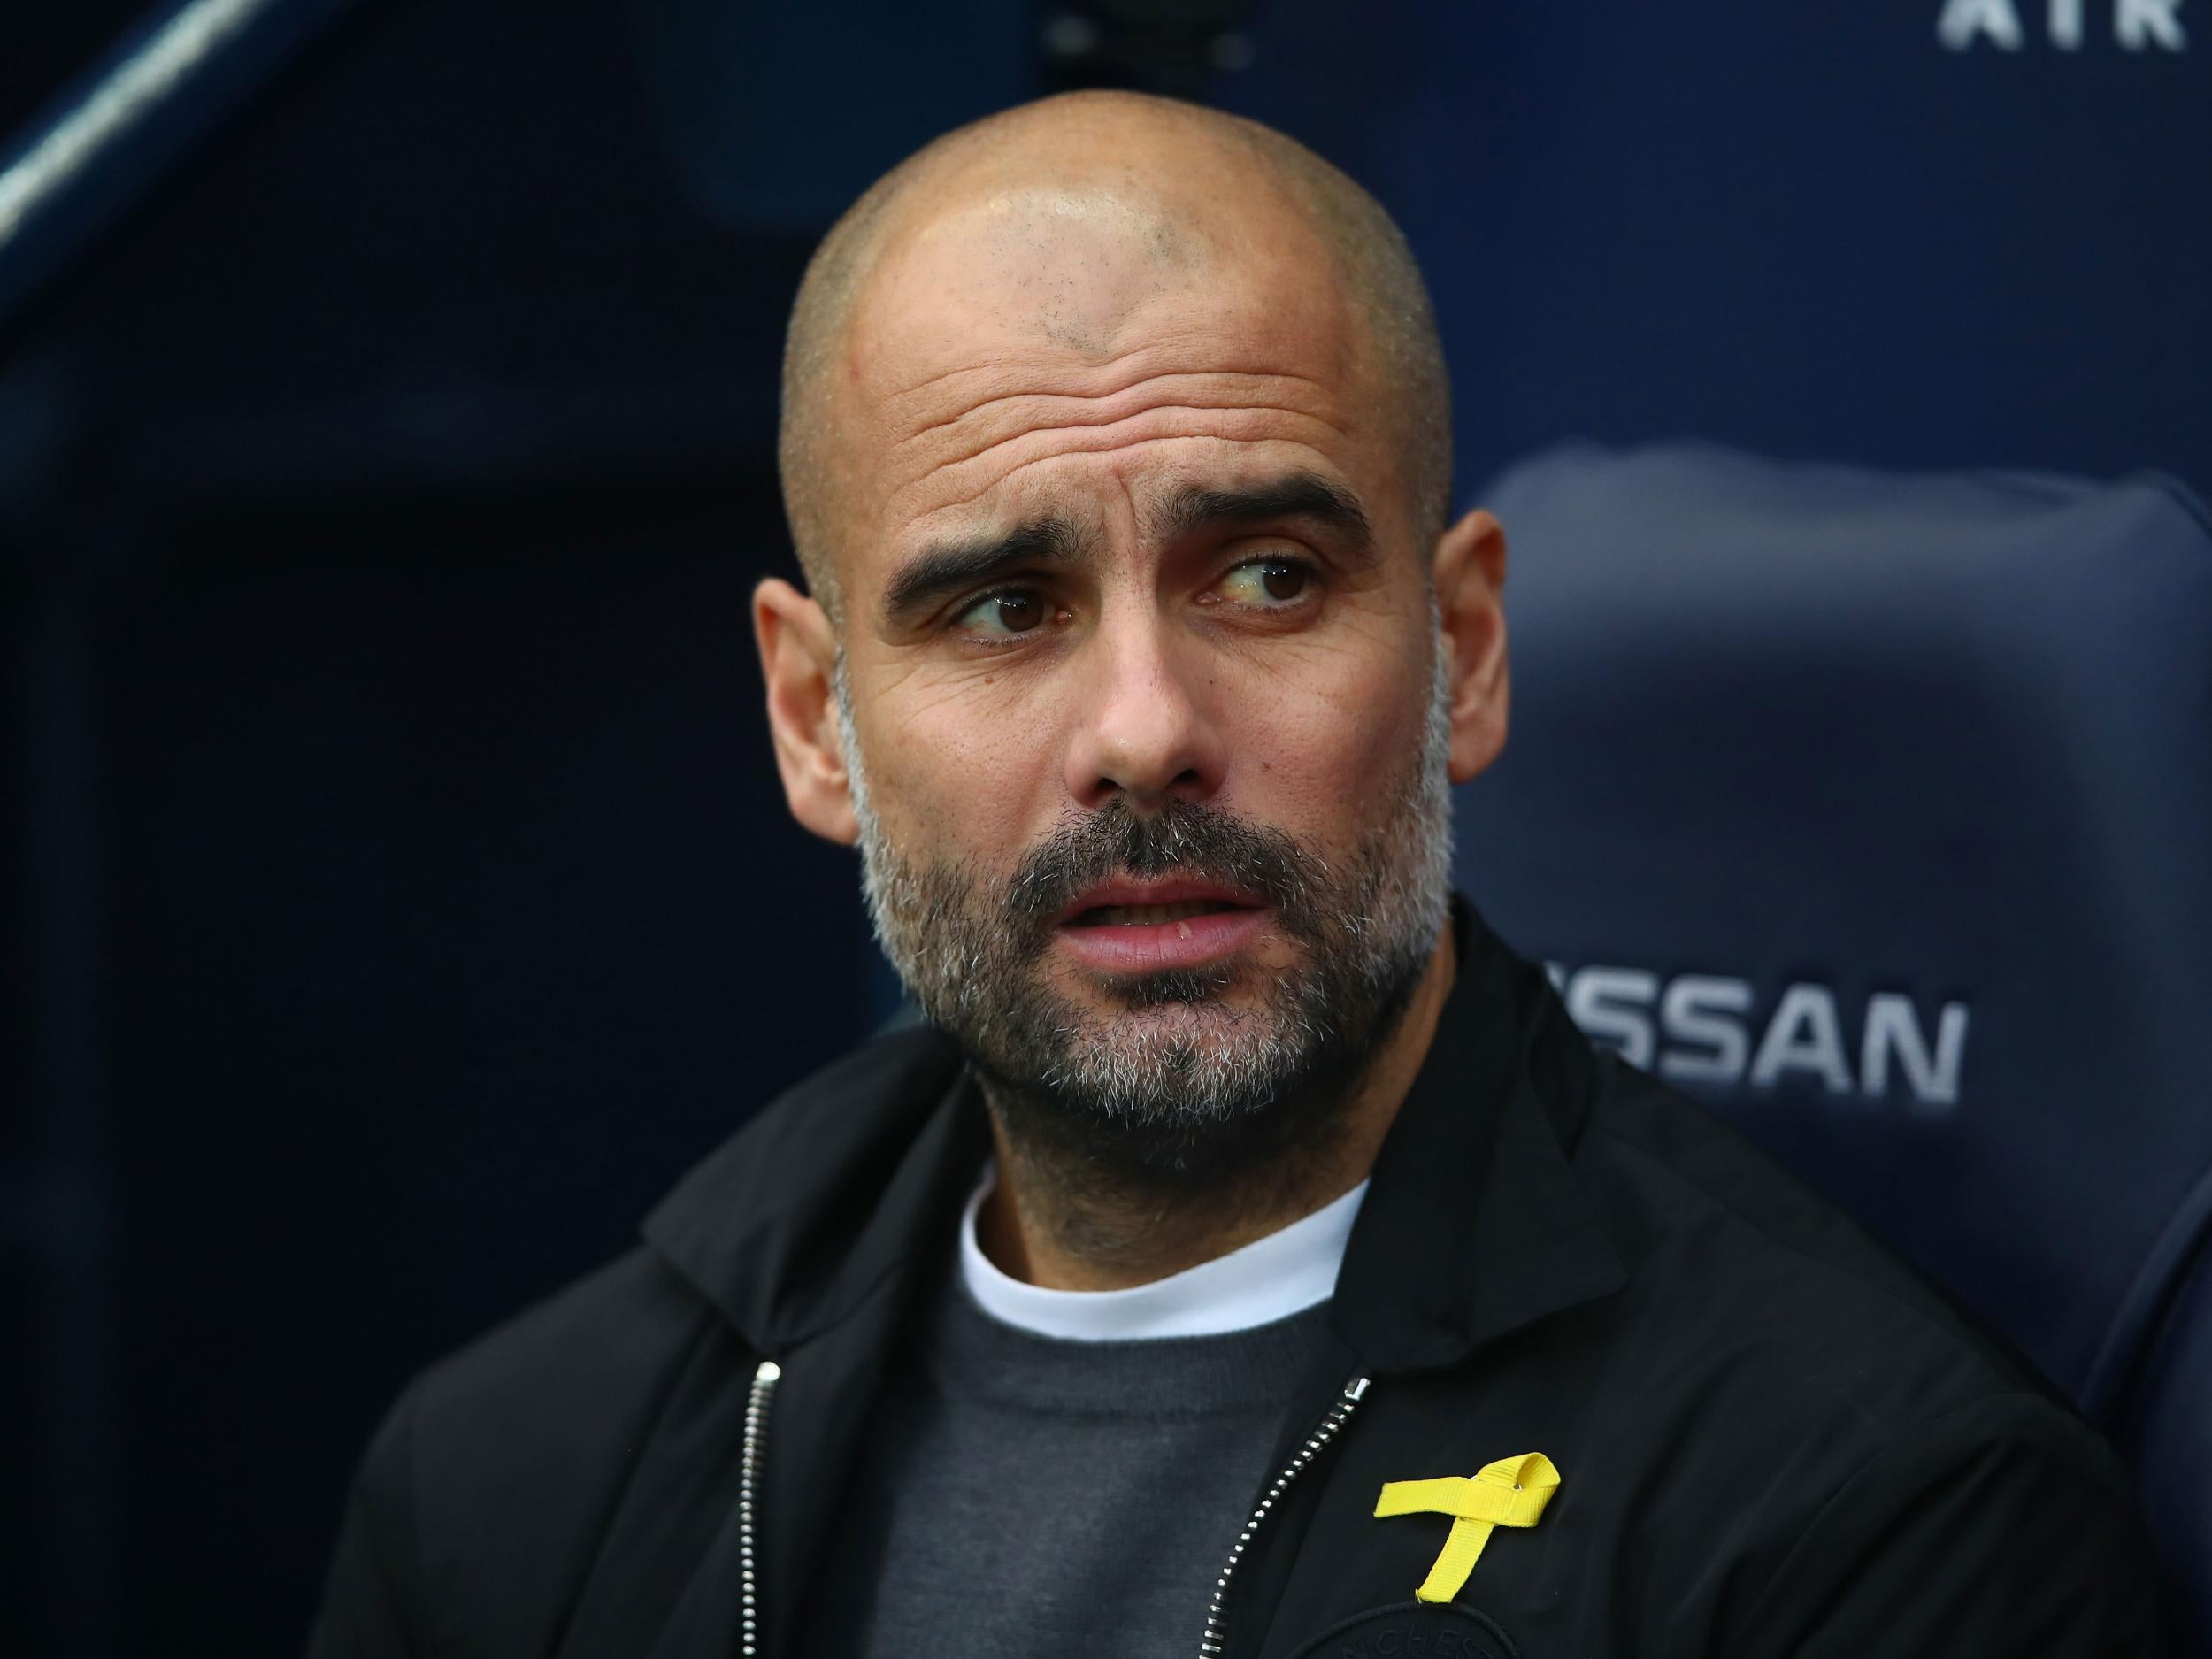 Guardiola has worn the yellow ribbon during matches since October